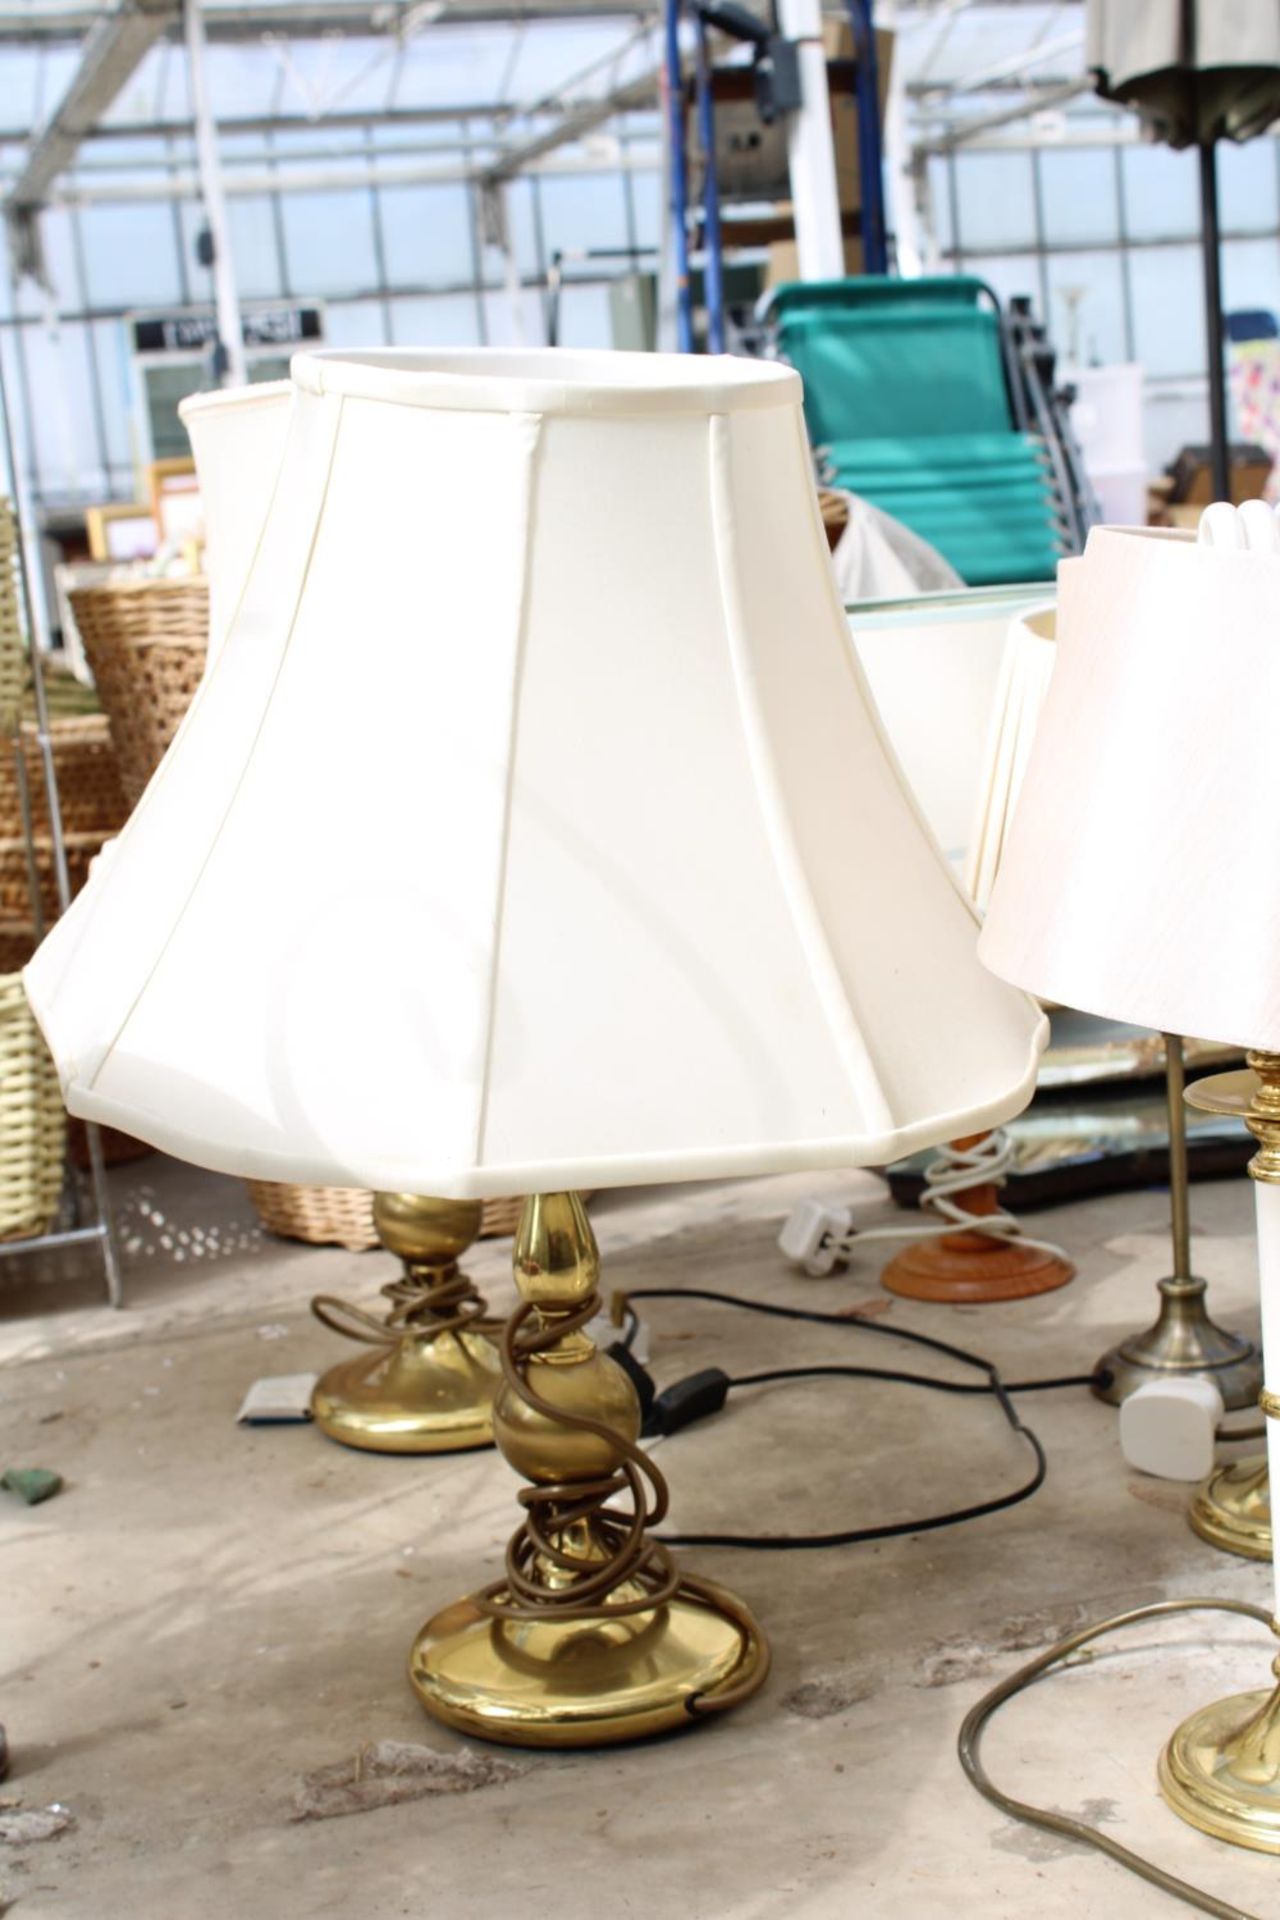 SIX VARIOUS TABLE LAMPS WITH SHADES - Image 3 of 3